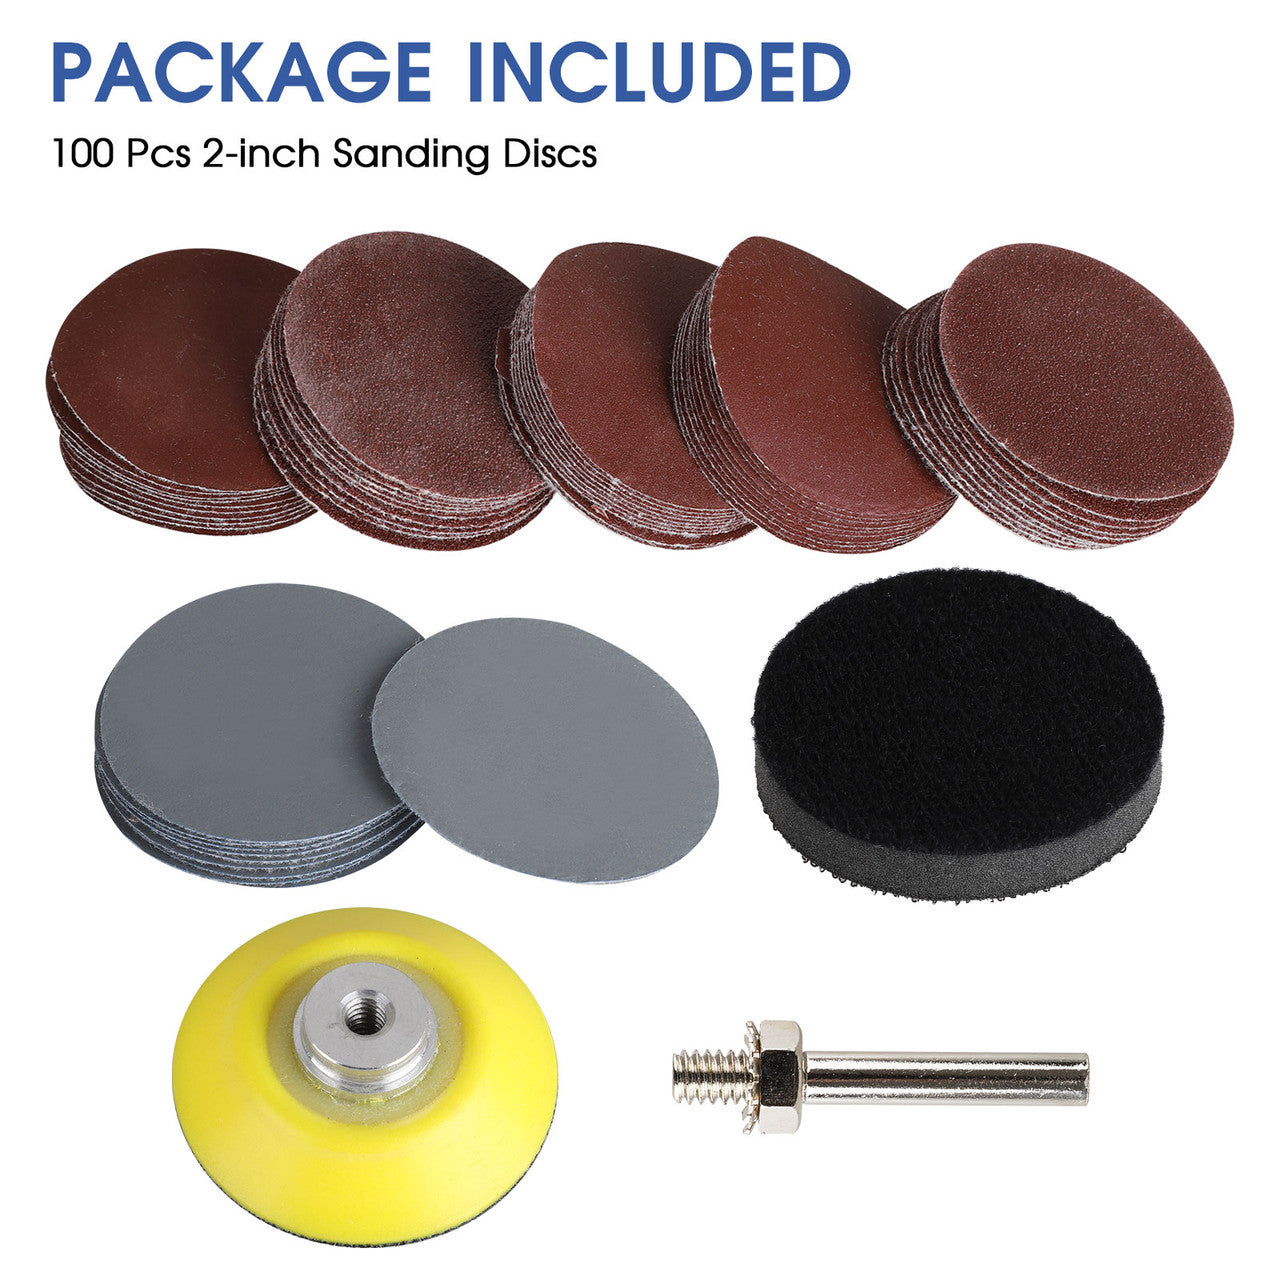 2 Inches Sanding Discs Pad Kit for Drill Sander, Drill Sanding Attachment Sandpapers with 1pc 1/4鈥欌€?Shank Backing Pad and 1pc Soft Foam Buffering Pad, 100pcs